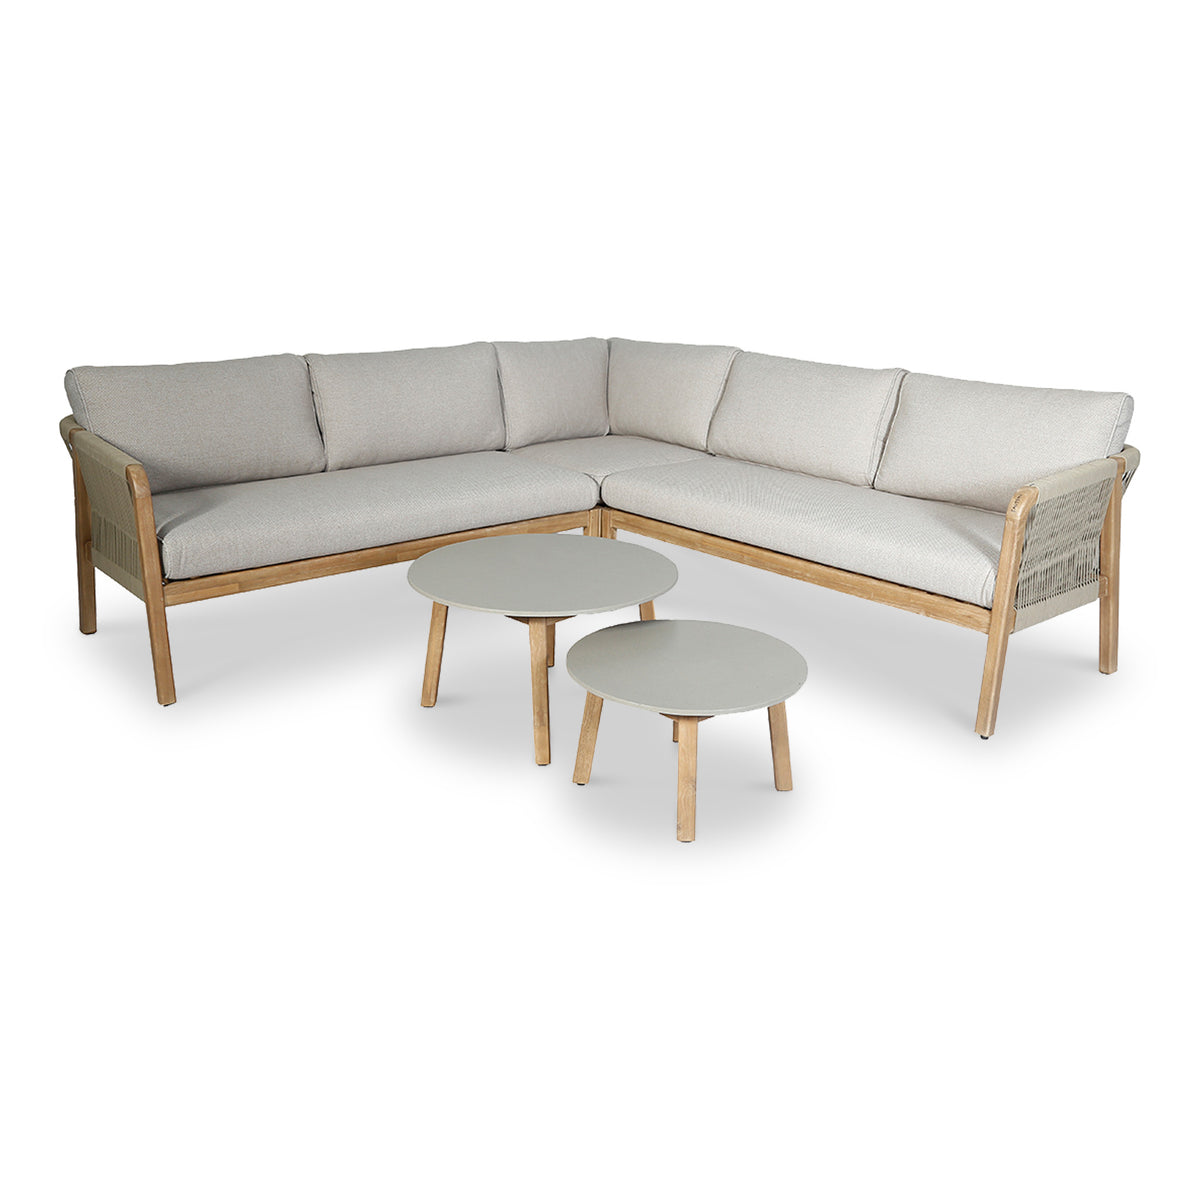 Maze Martinique Outdoor Corner Sofa with 2 Tables from Roseland Furniture